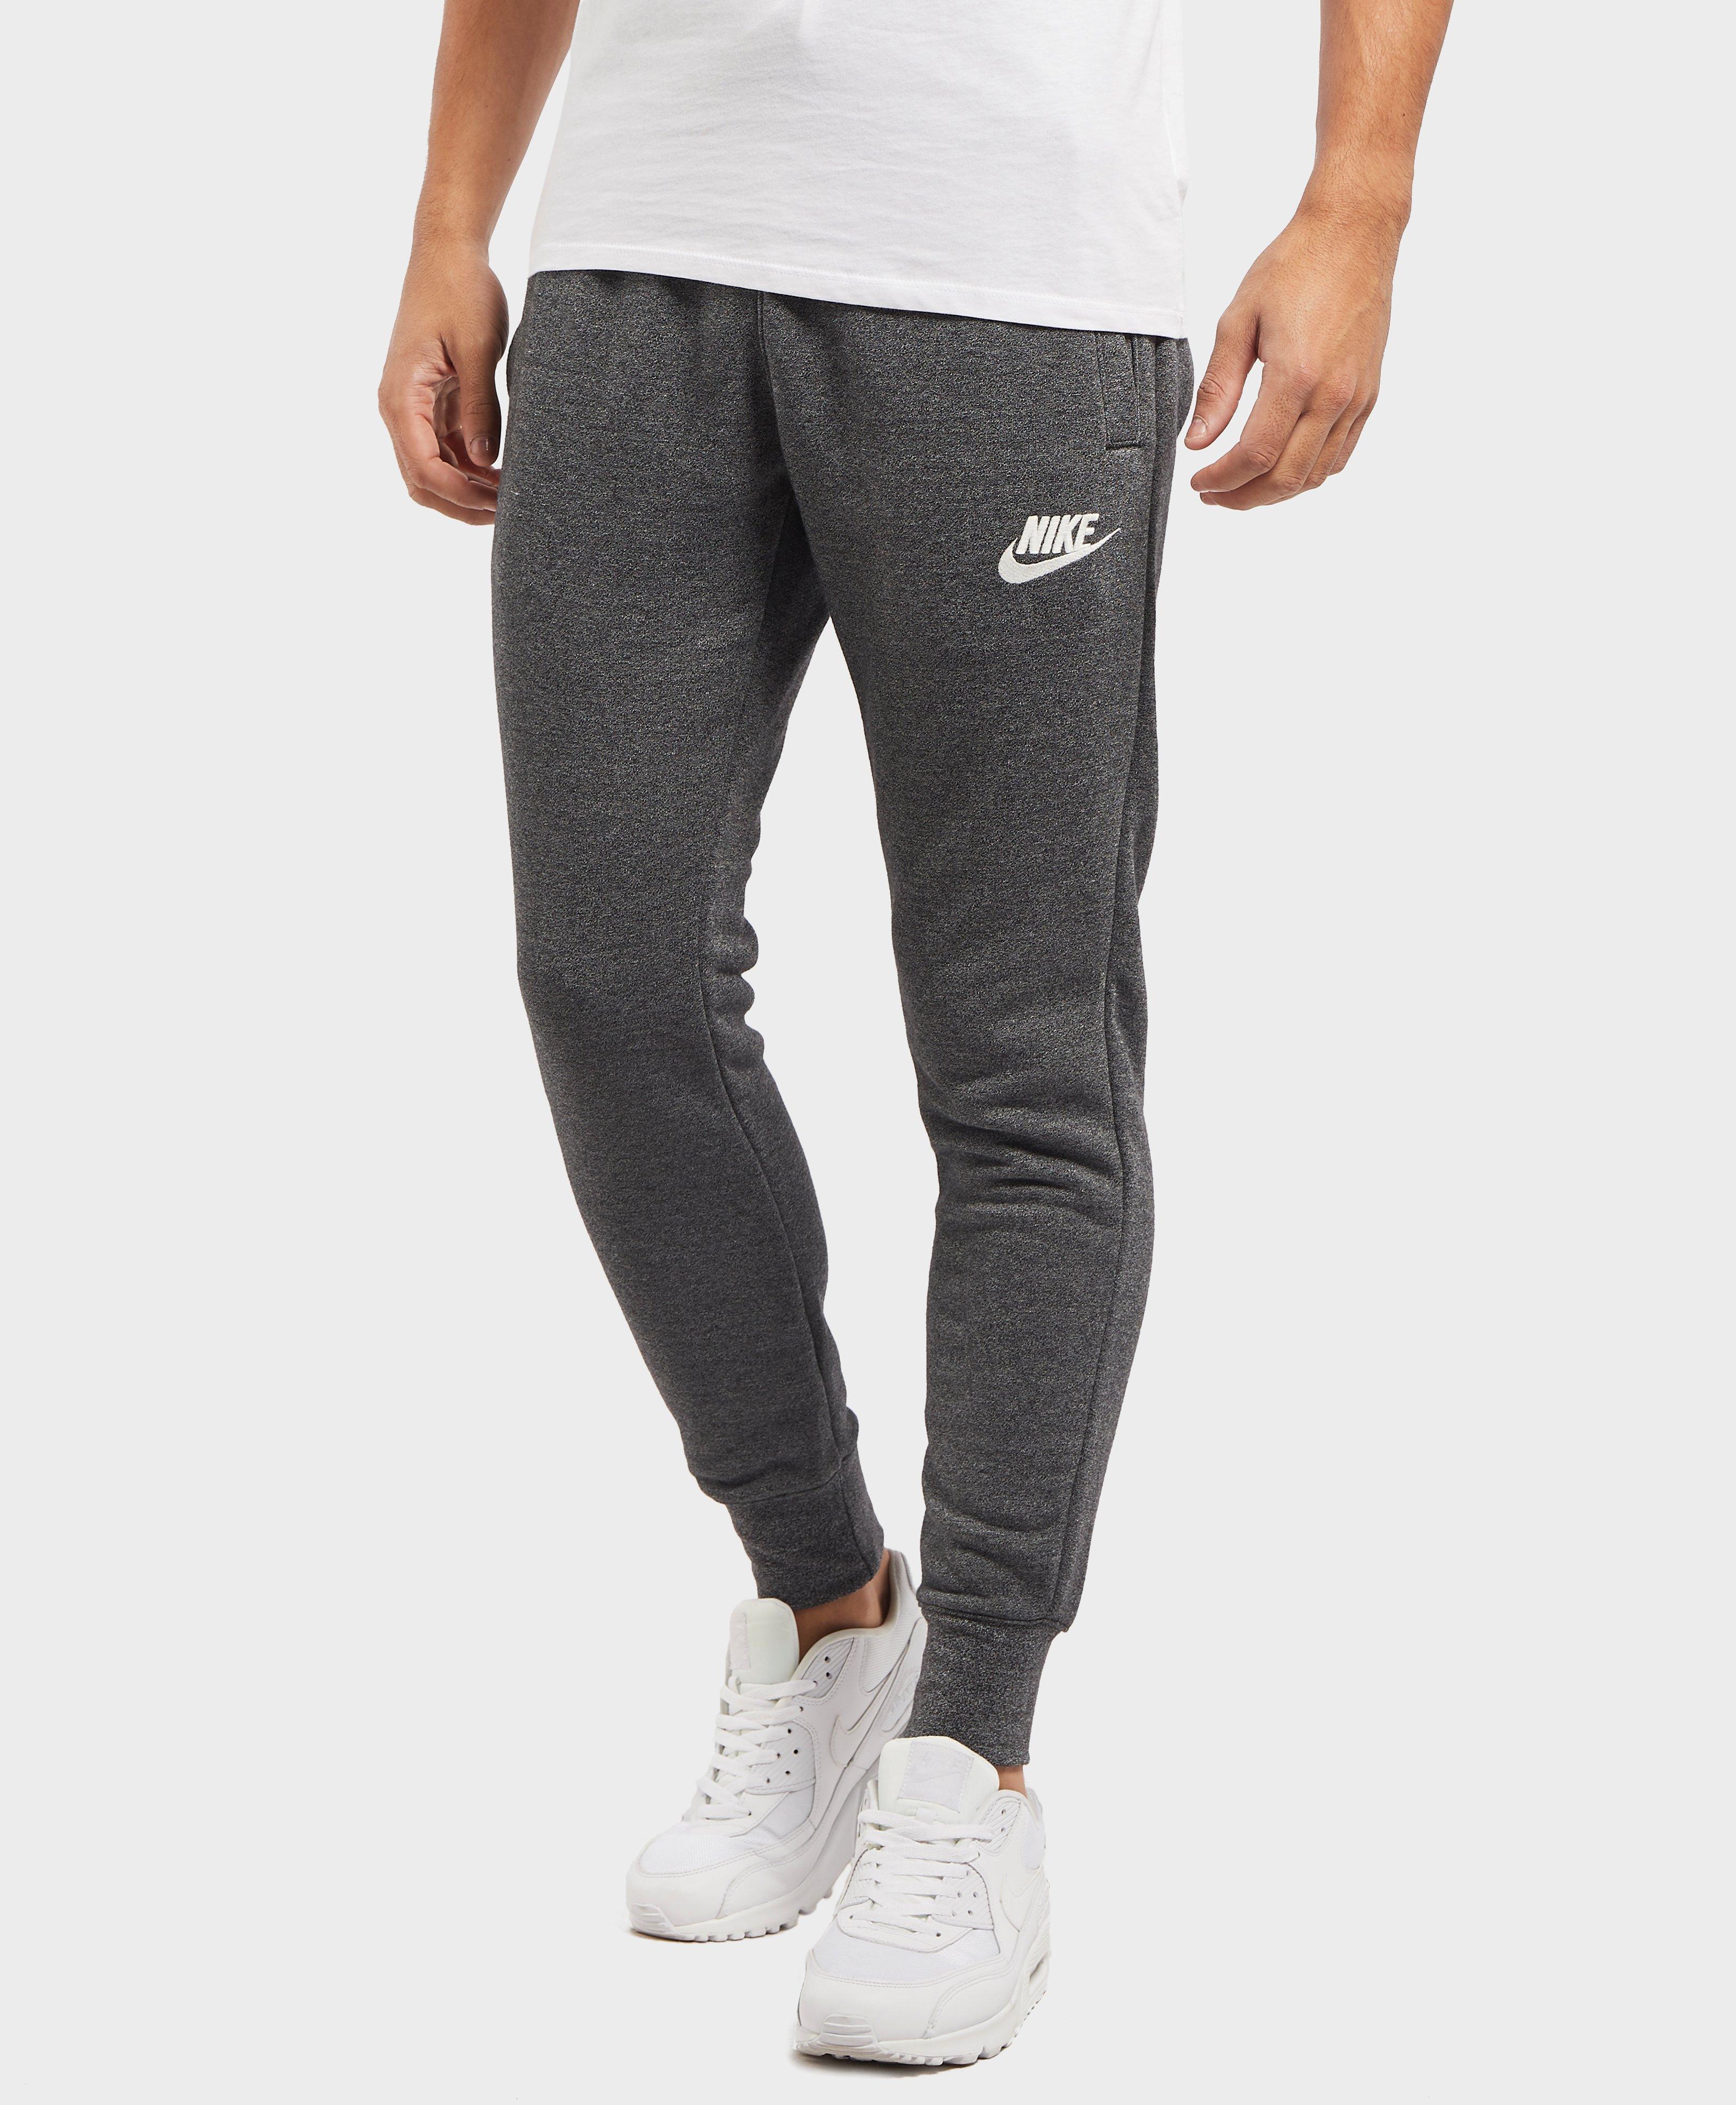 Nike Cotton Heritage Track Pants in Gray for Men - Lyst